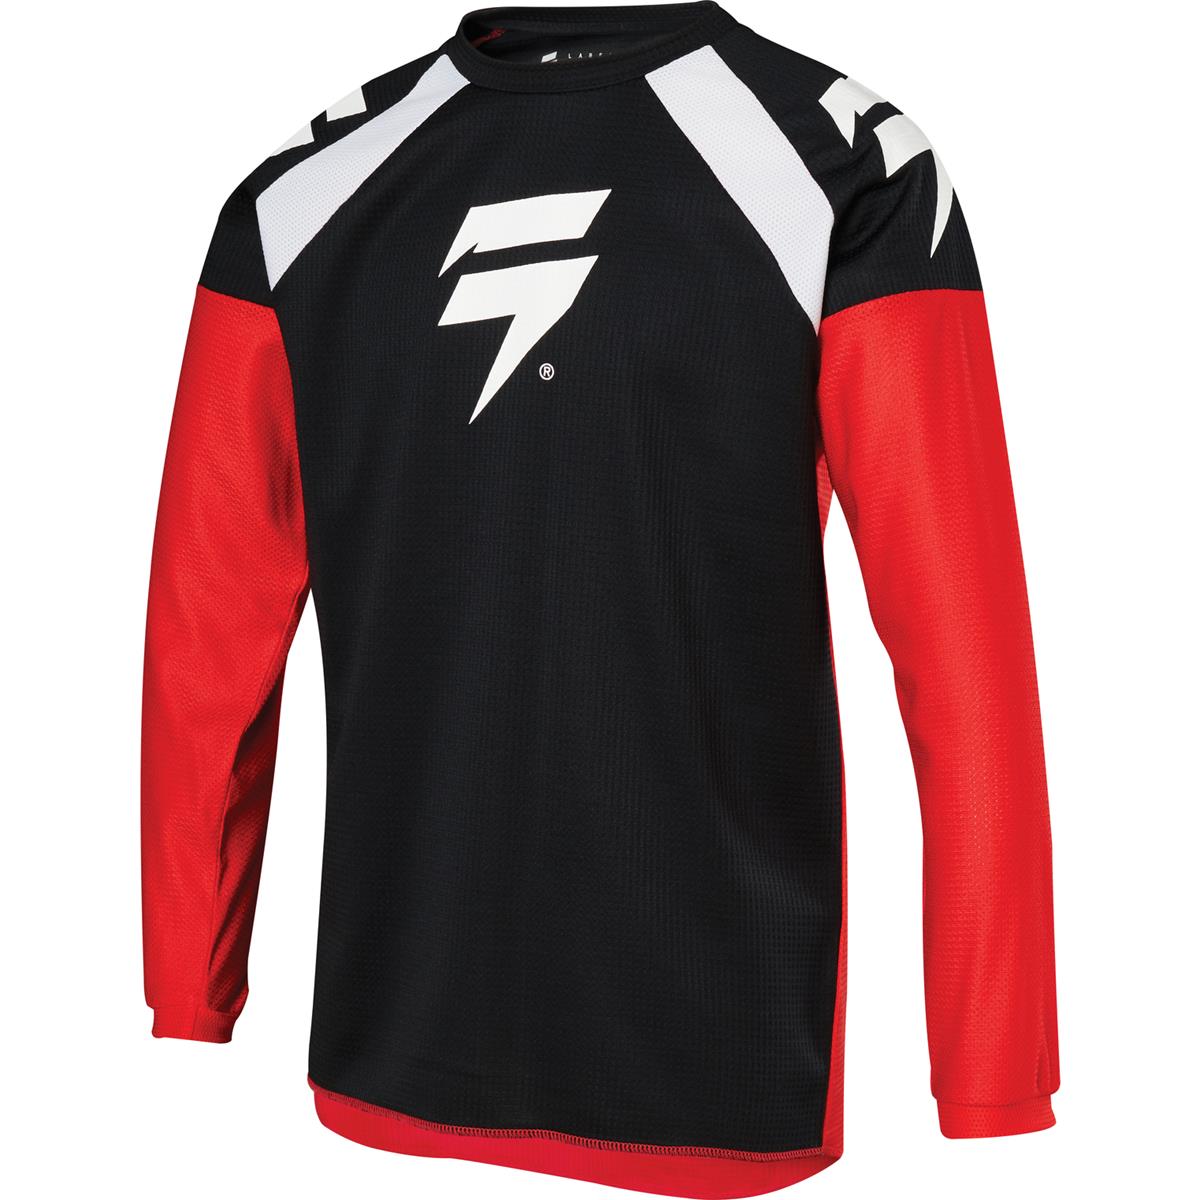 Shift Jersey Whit3 Label Black/Red